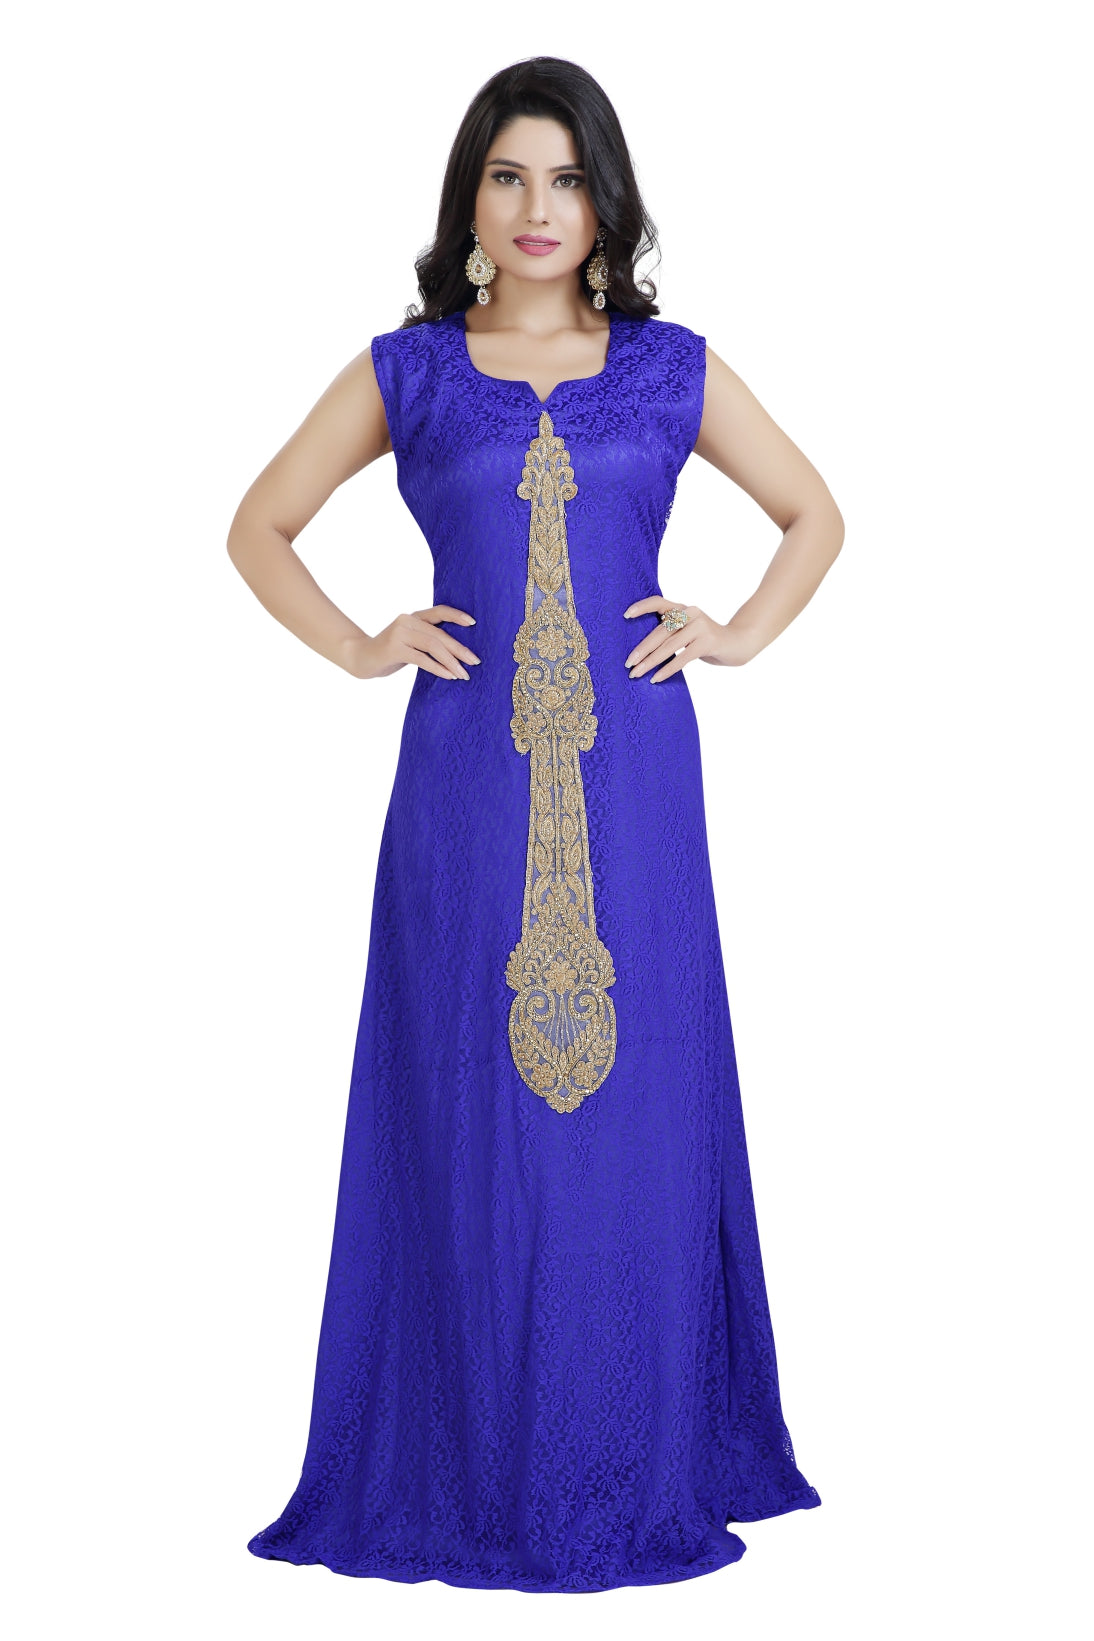 Royal Blue Satin Lace Purple Dresses For Weddings With High Neckline,  Crystals, And Applique Colorful Ball Gown Bridal G From Saruidress, $235.18  | DHgate.Com